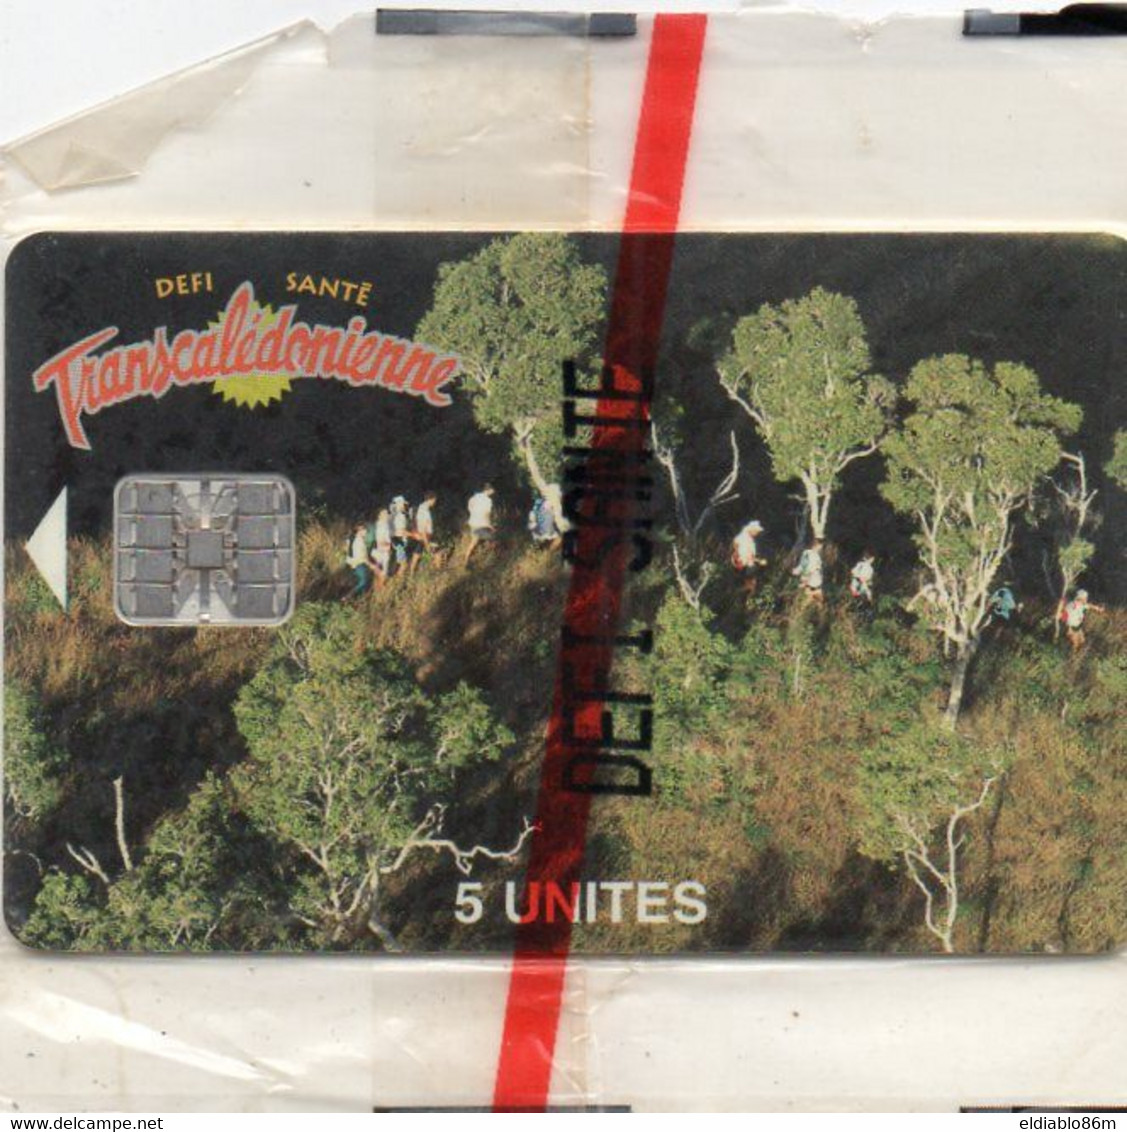 NEW CALEDONIA - CHIP CARD - TRANSCALEDONIENNE - NO CN - MINT IN BLISTER - Nouvelle-Calédonie